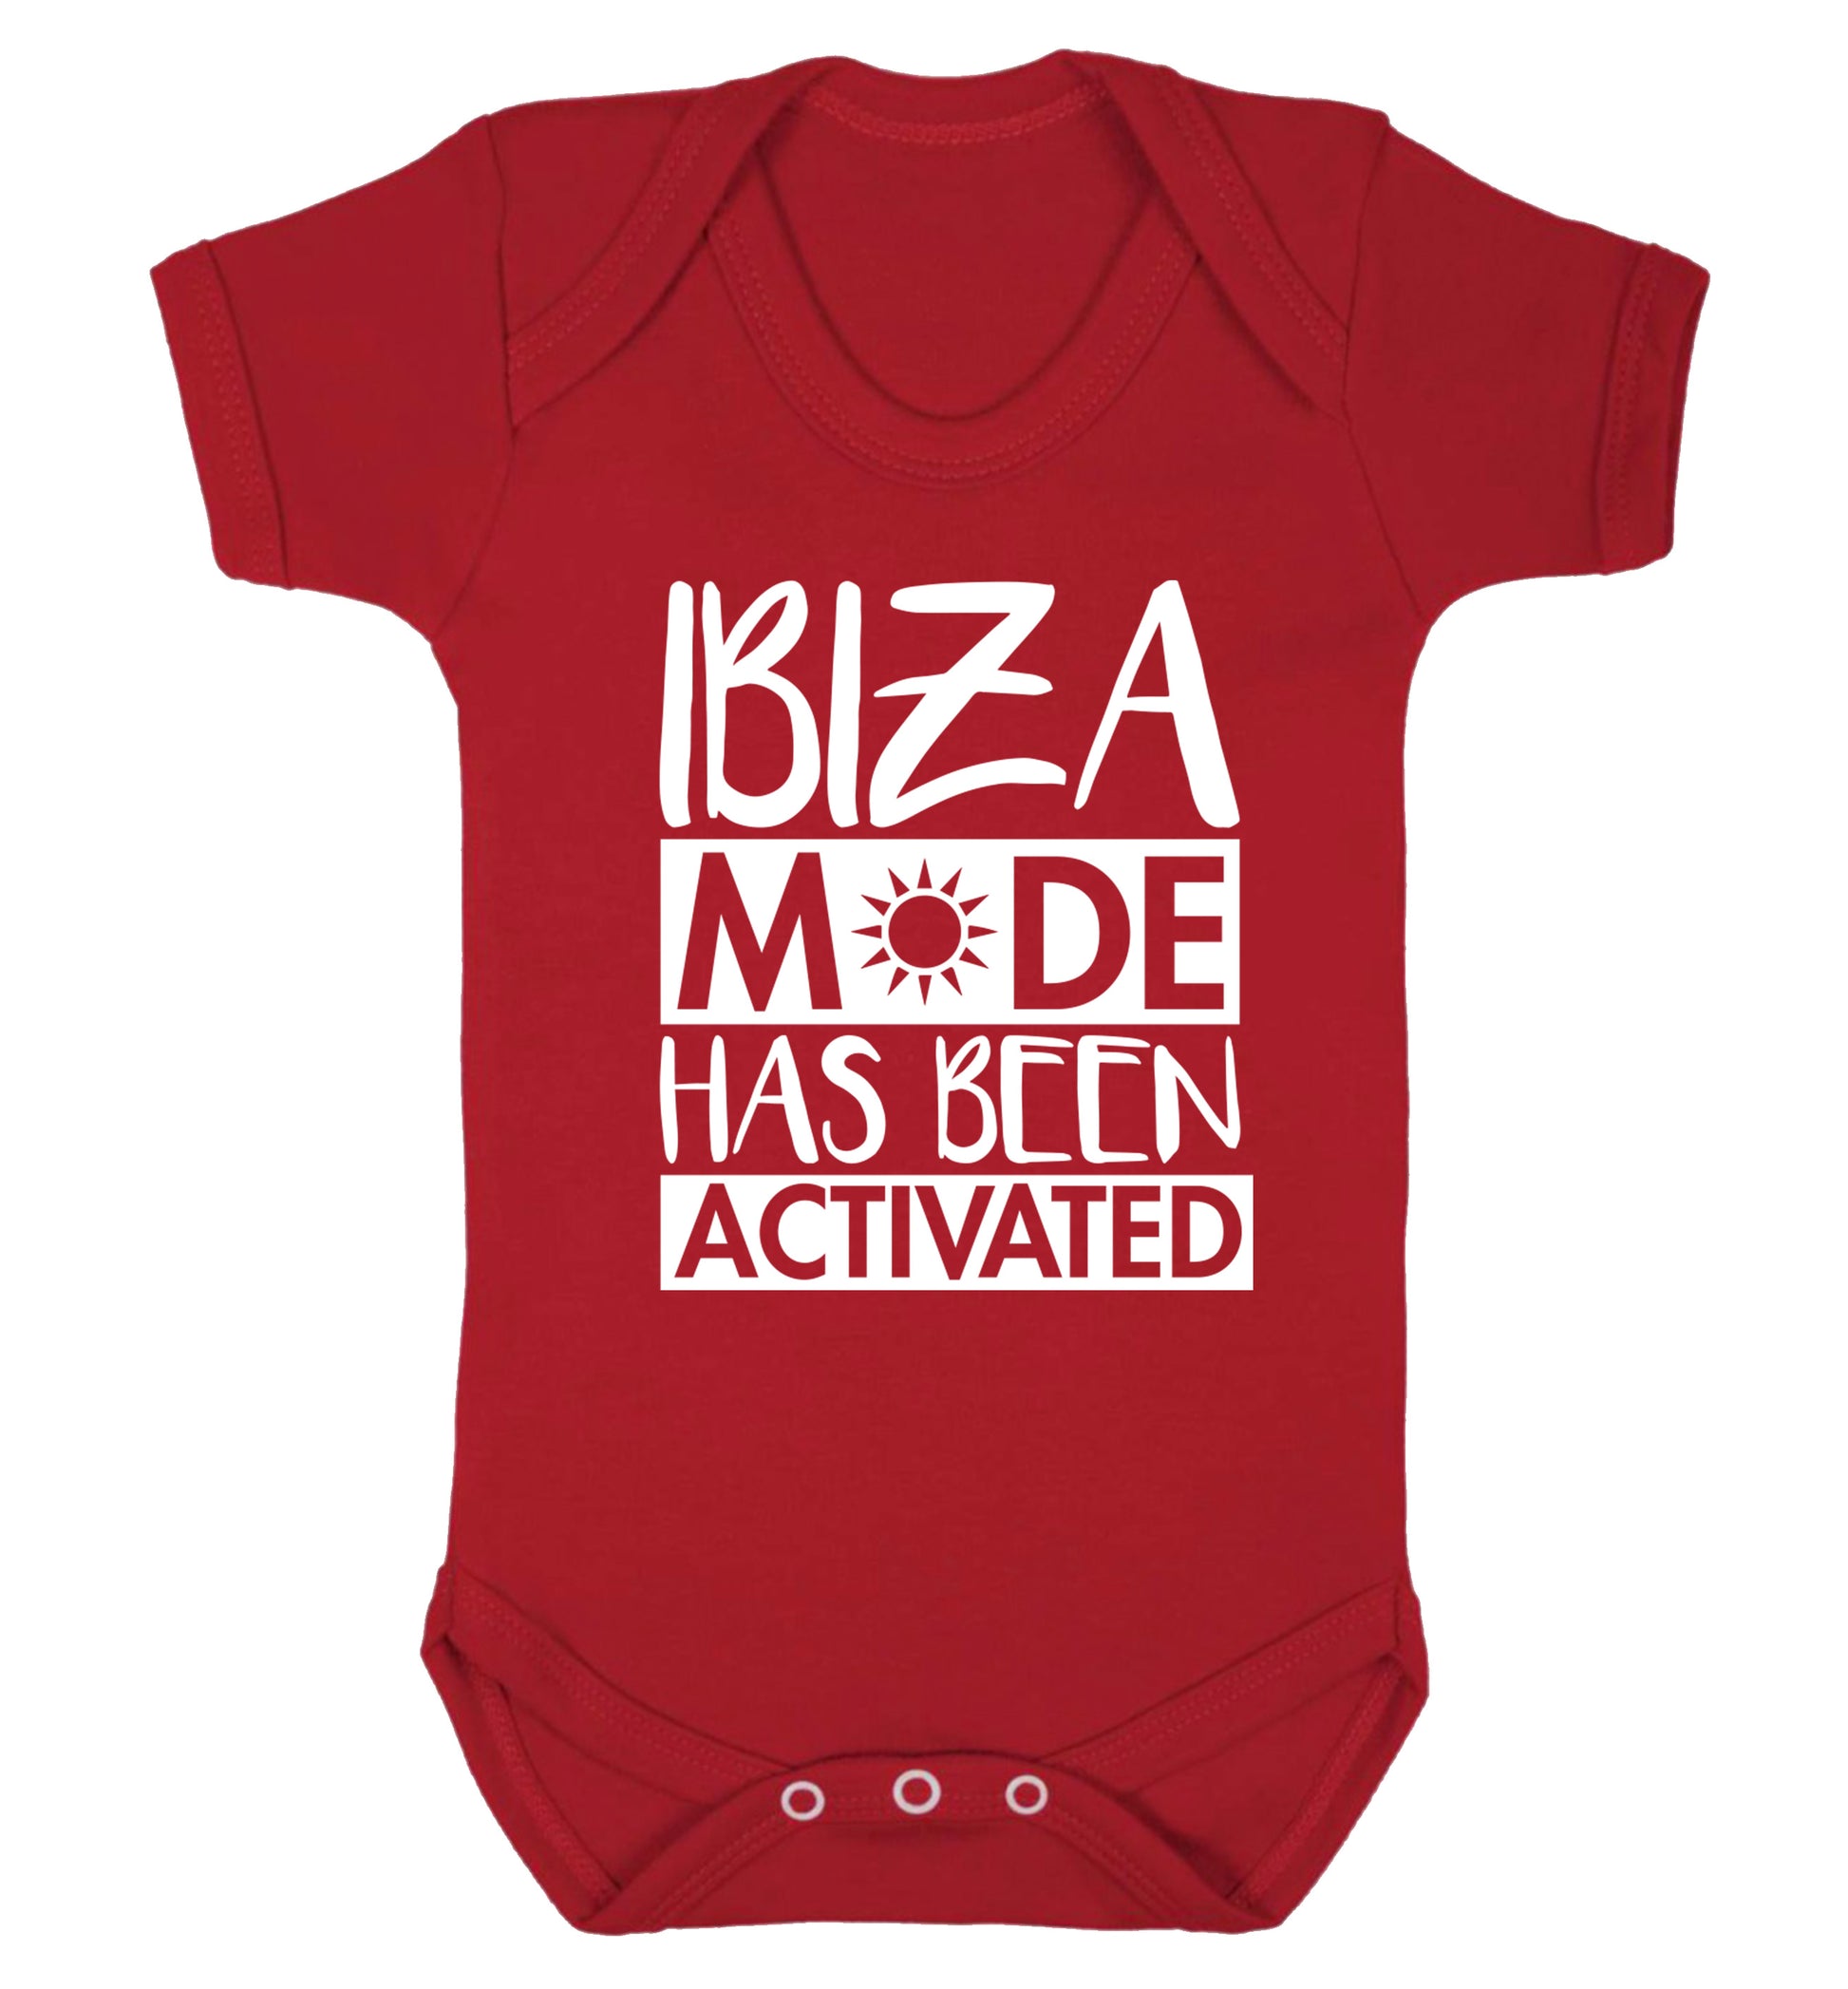 Ibiza mode has been activated Baby Vest red 18-24 months